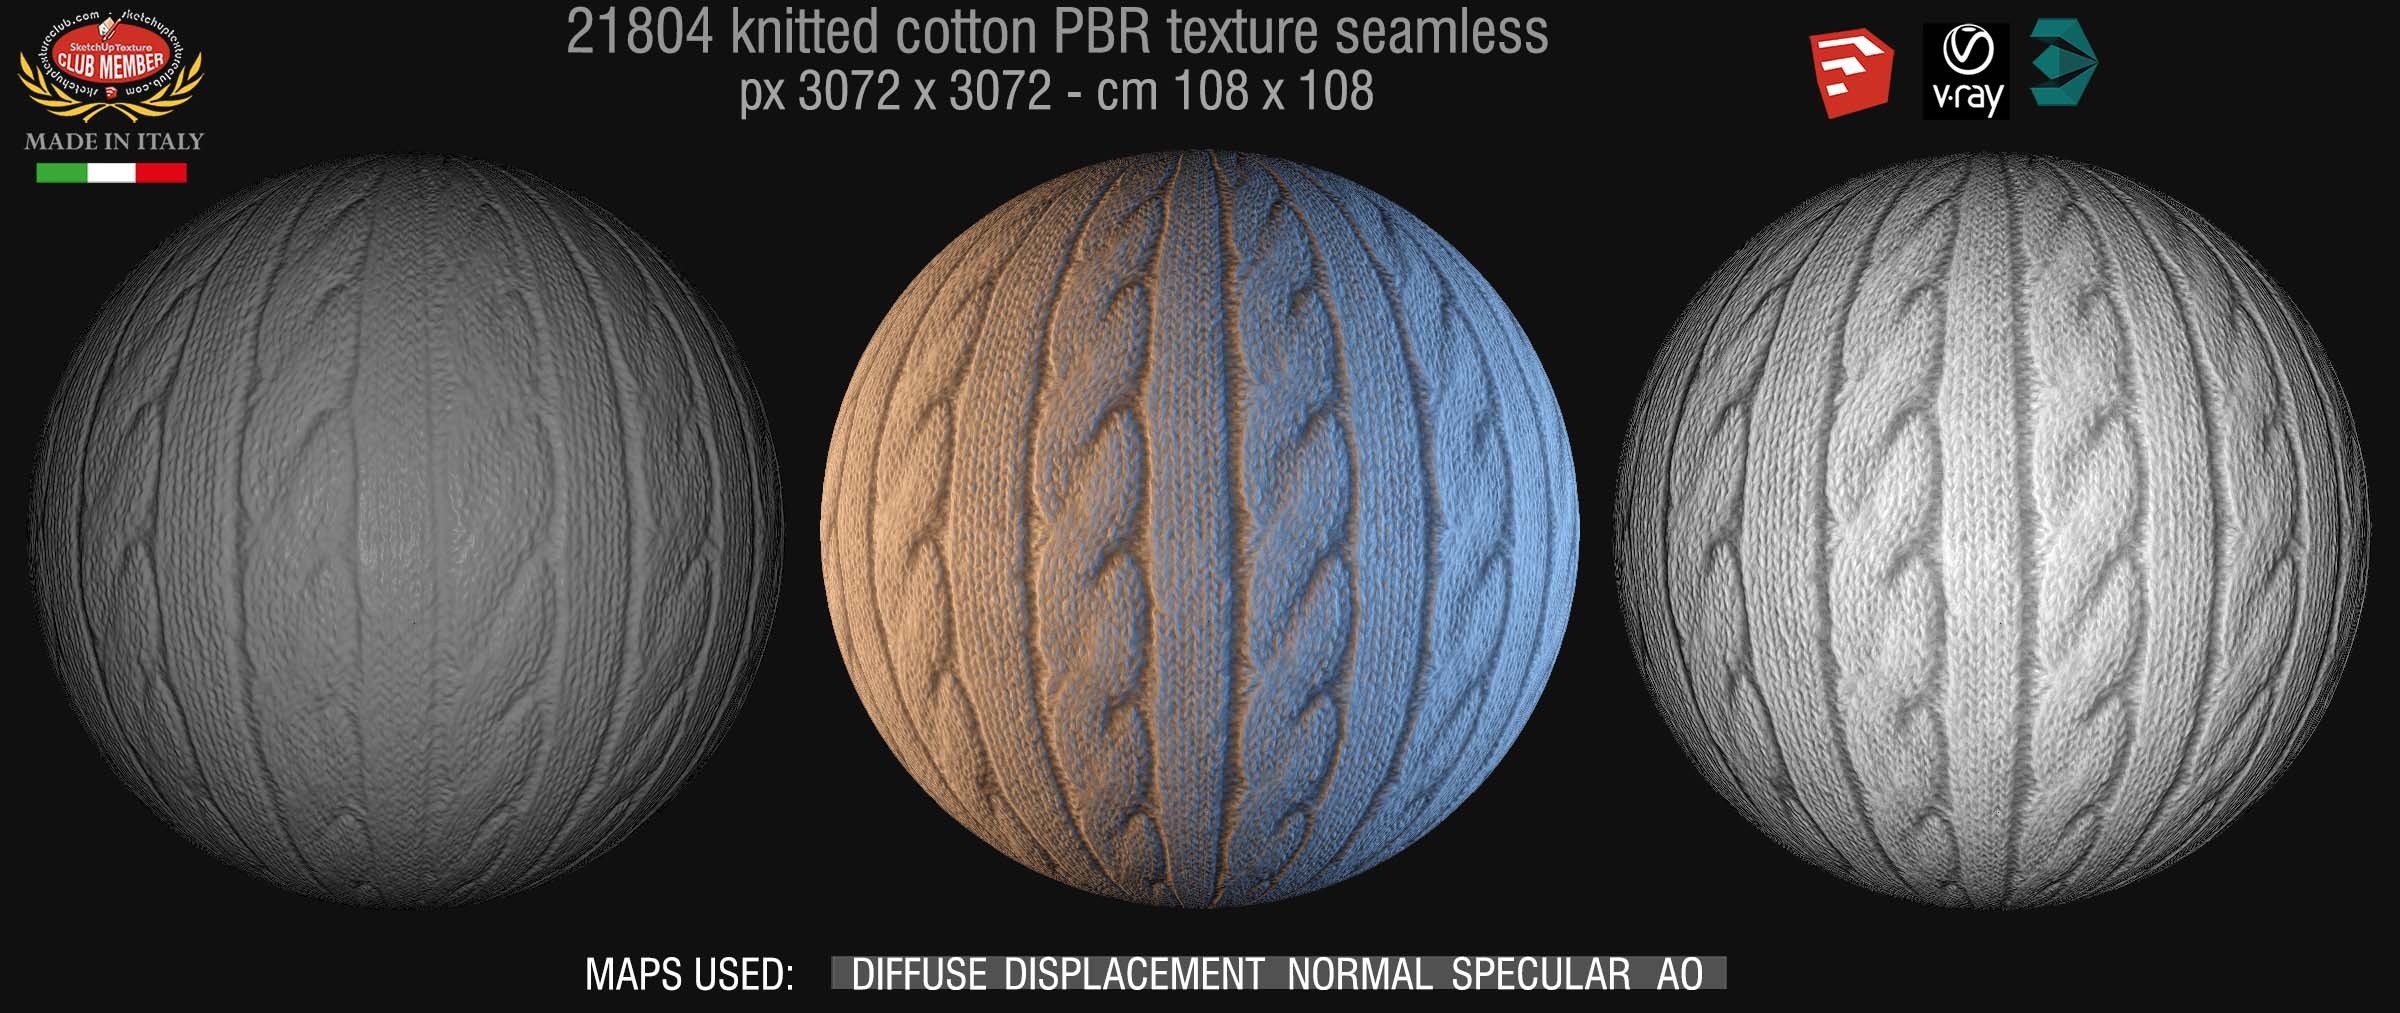 21804 wool knitted PBR texture seamless DEMO